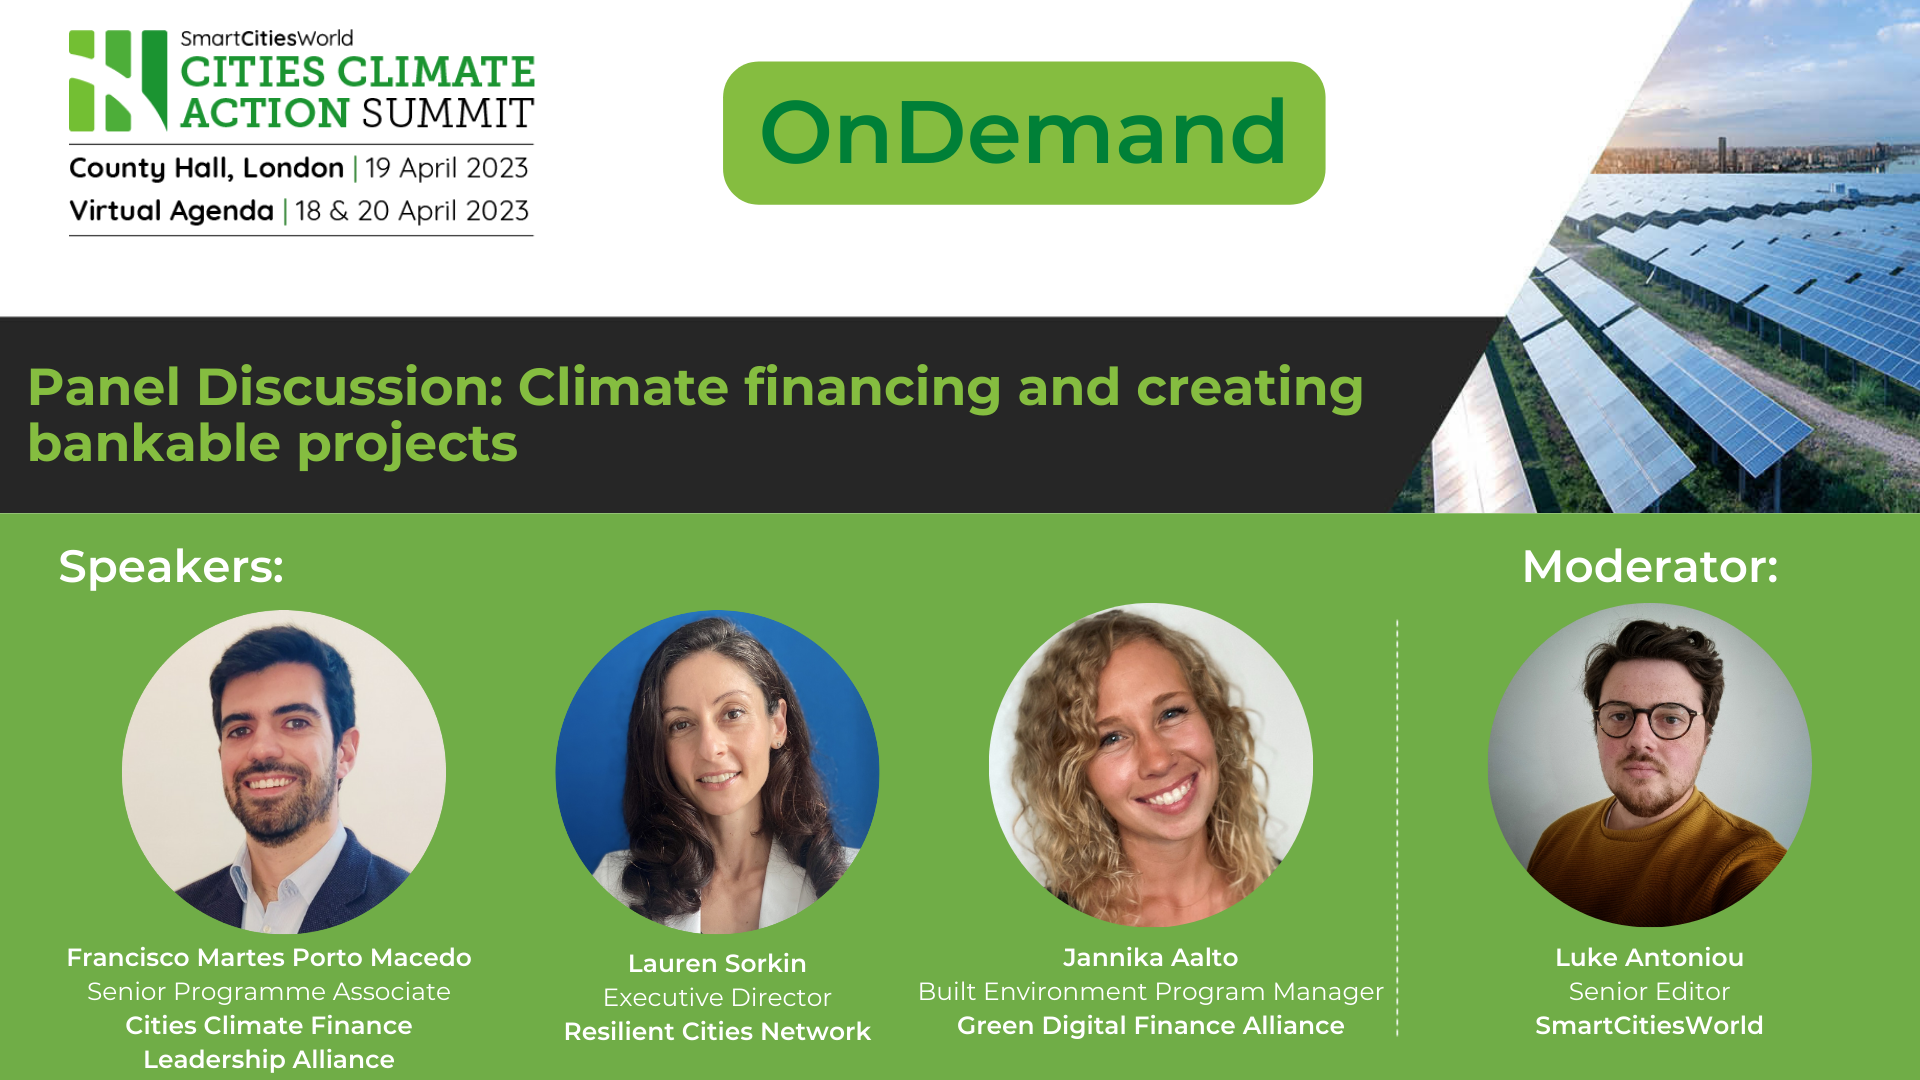 OnDemand Panel discussion: Climate financing and creating bankable projects